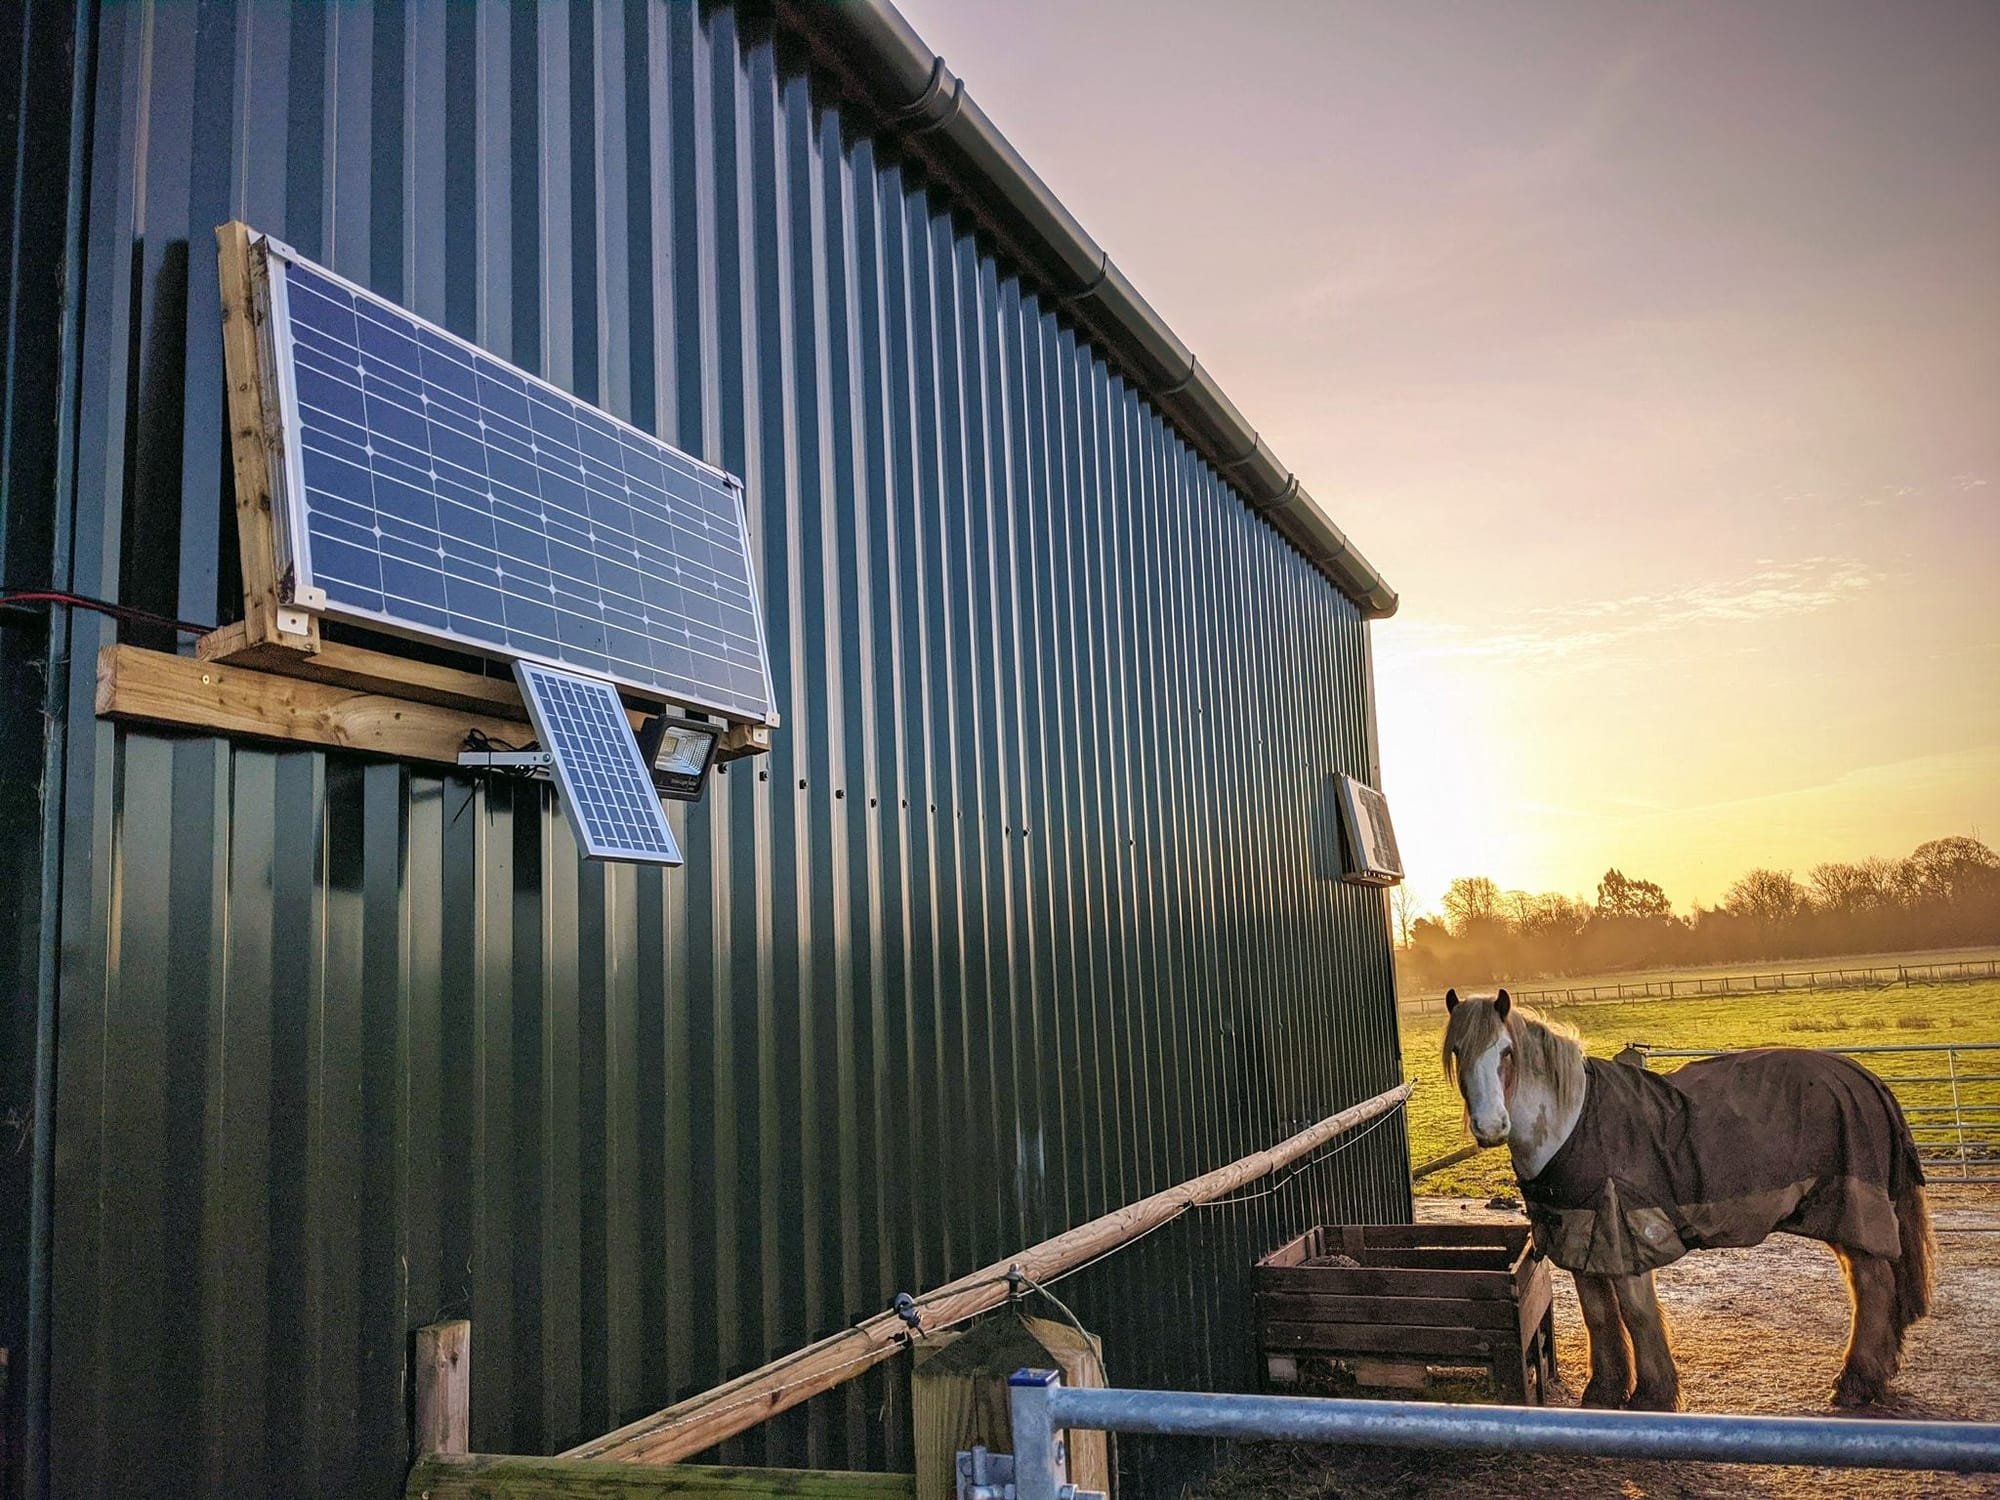 We are Off-Grid and rely on solar panels to power our electric fences and security cameras